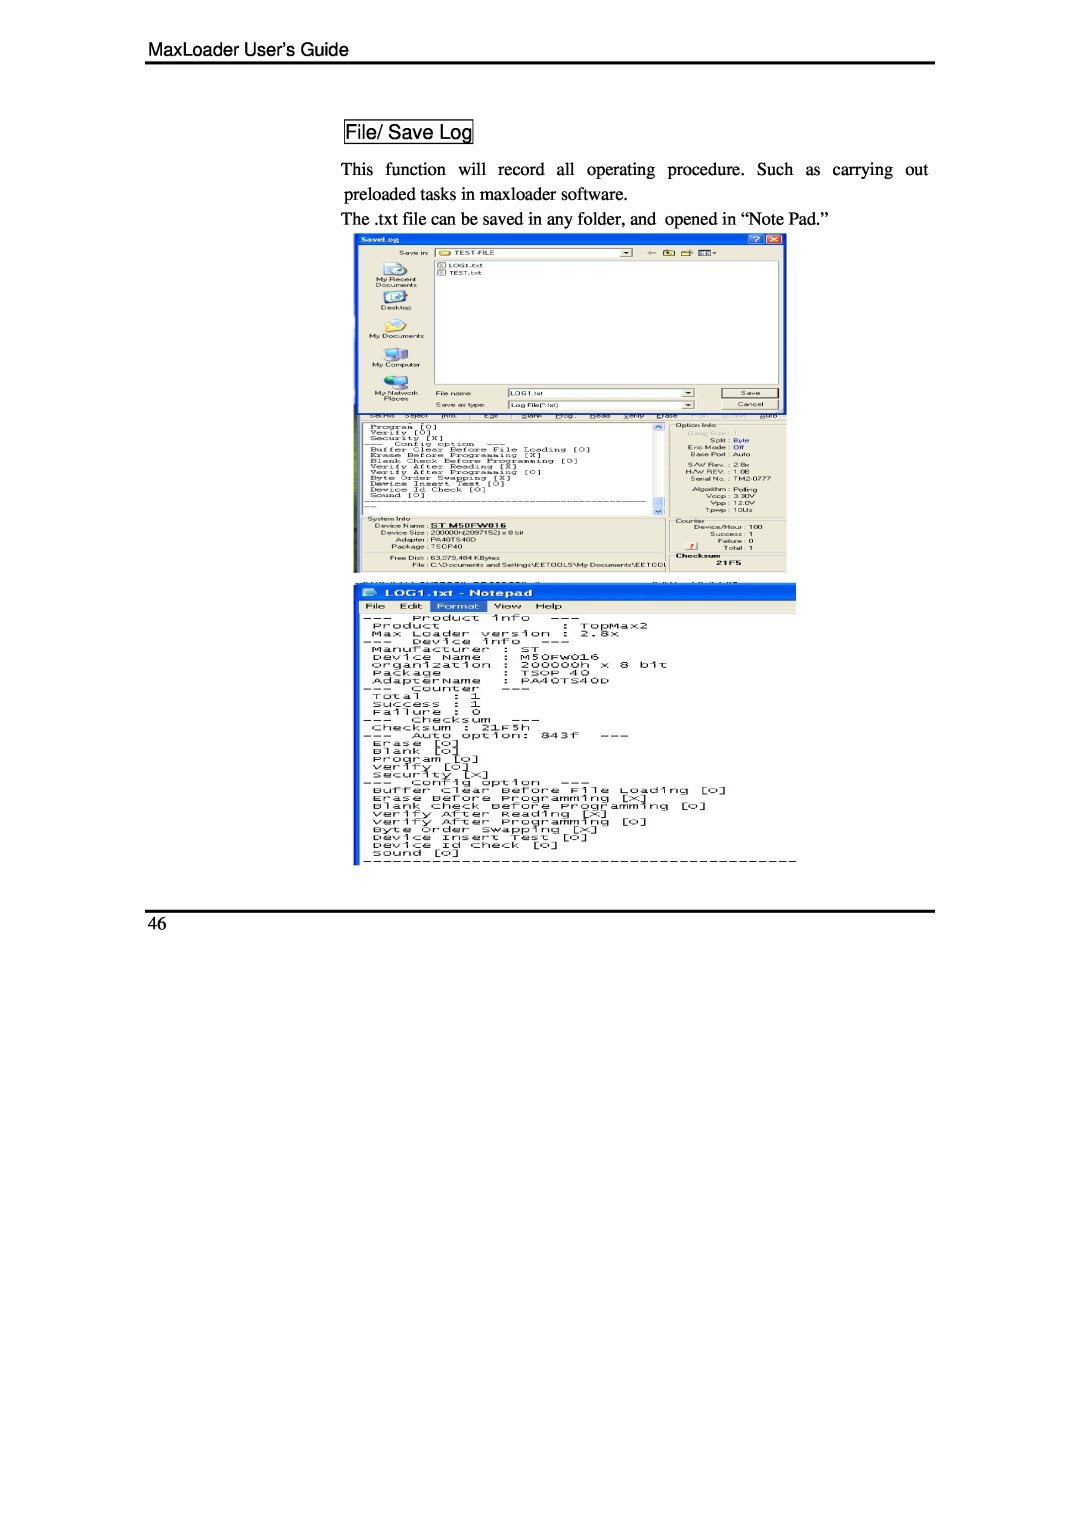 IBM manual File/ Save Log, MaxLoader User’s Guide, The .txt file can be saved in any folder, and opened in “Note Pad.” 